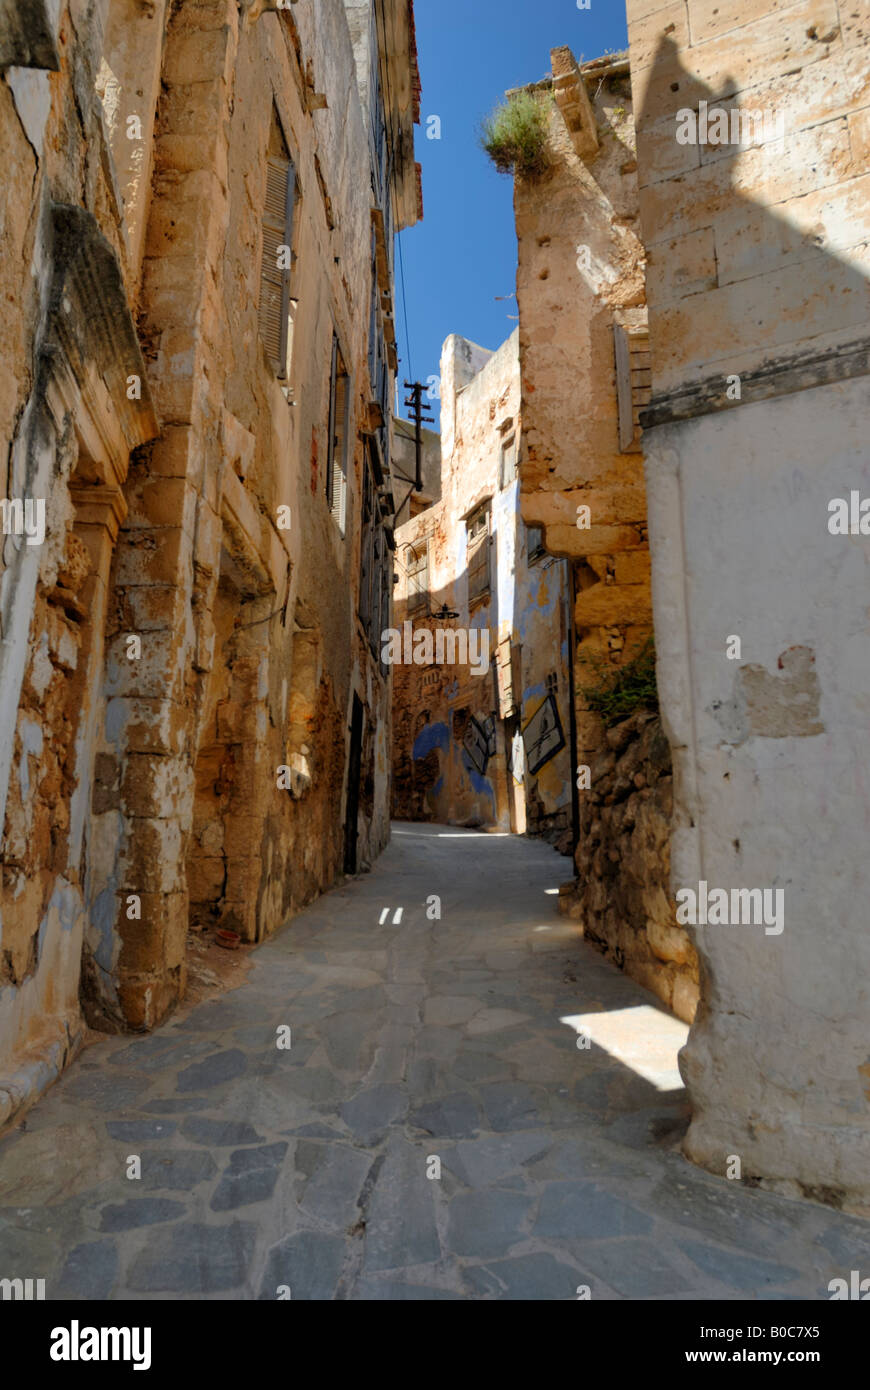 A street view at the old town of Chania, Crete, Greece, Europe. Stock Photo